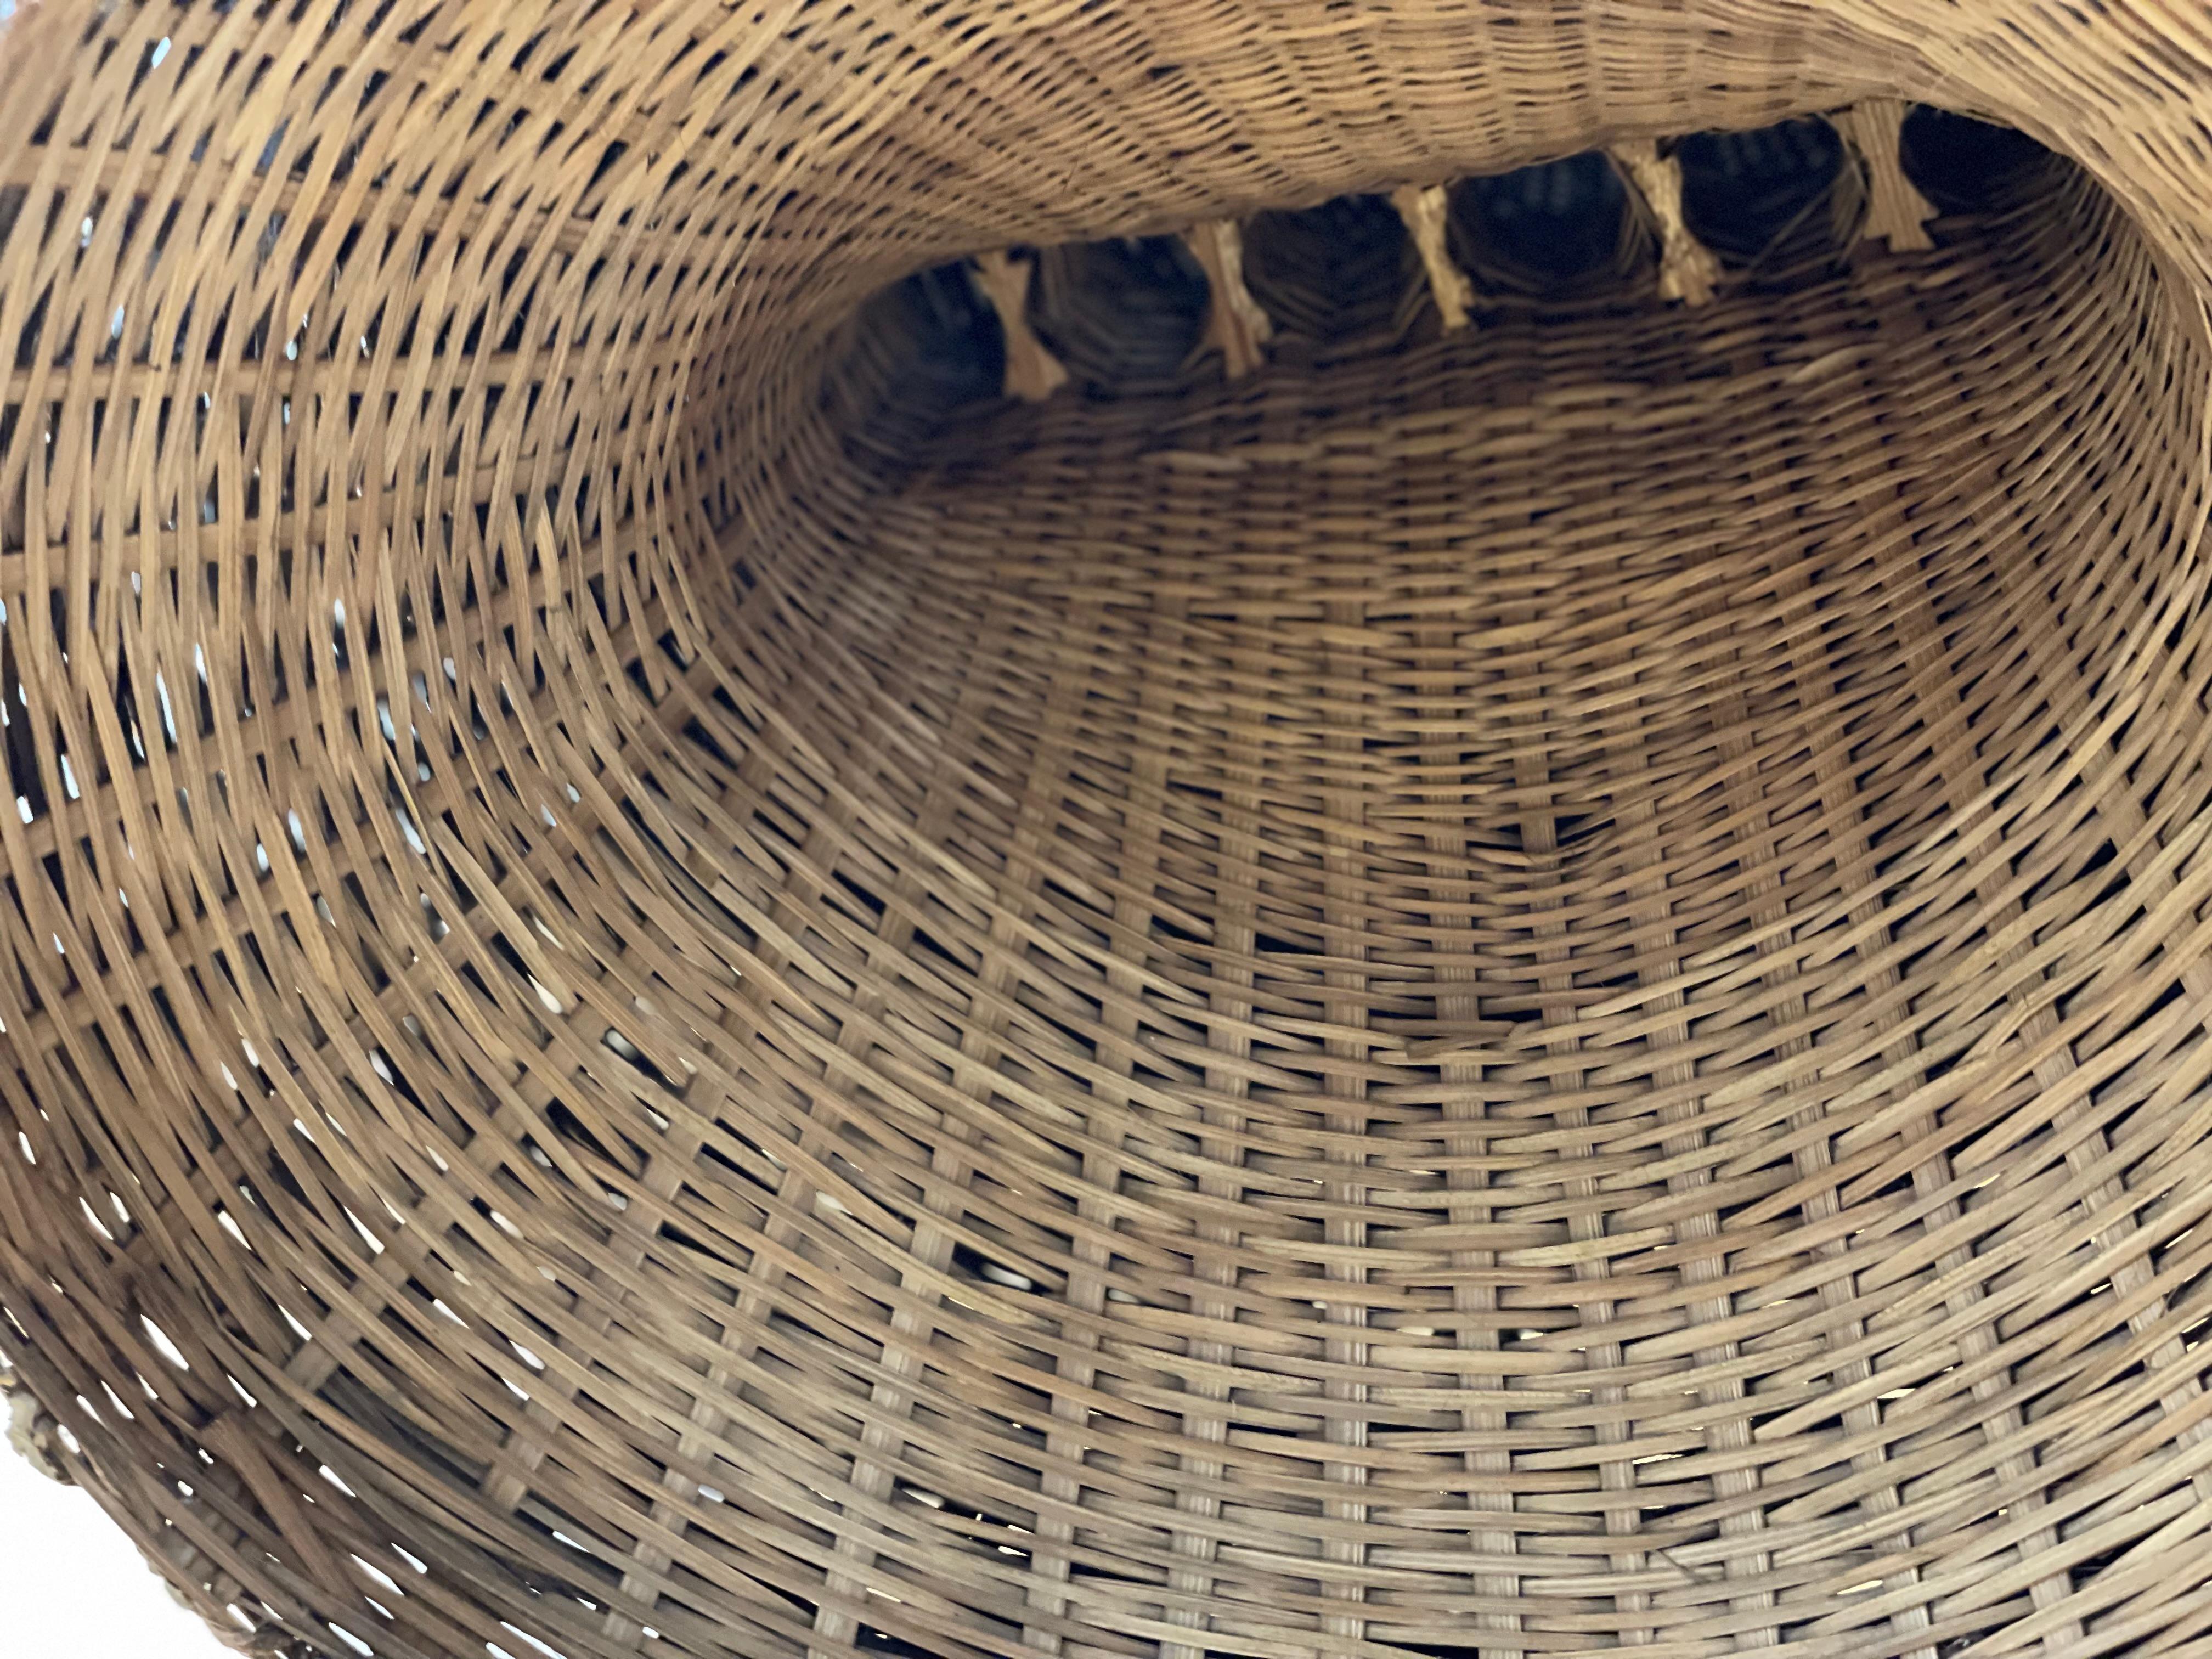 Mid-20th Century Philippines northLuzon 1960s cylindrical fish trap basket For Sale